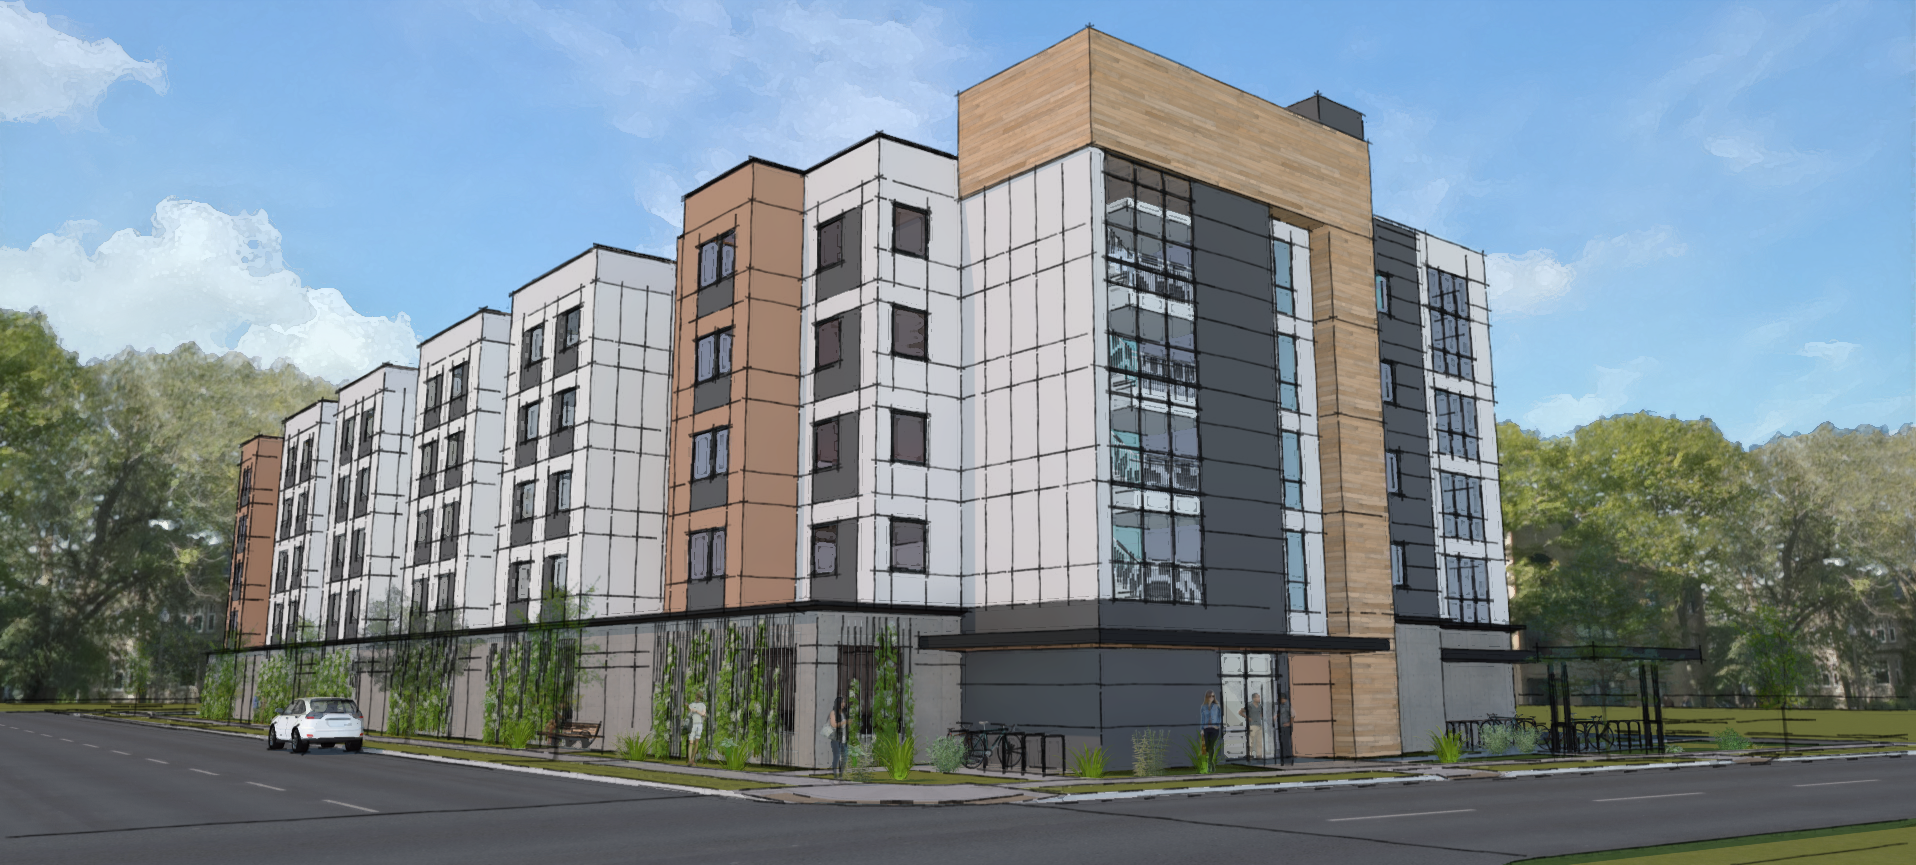 2020-07-23_23rd St Apartments_Exterior Render-2.png